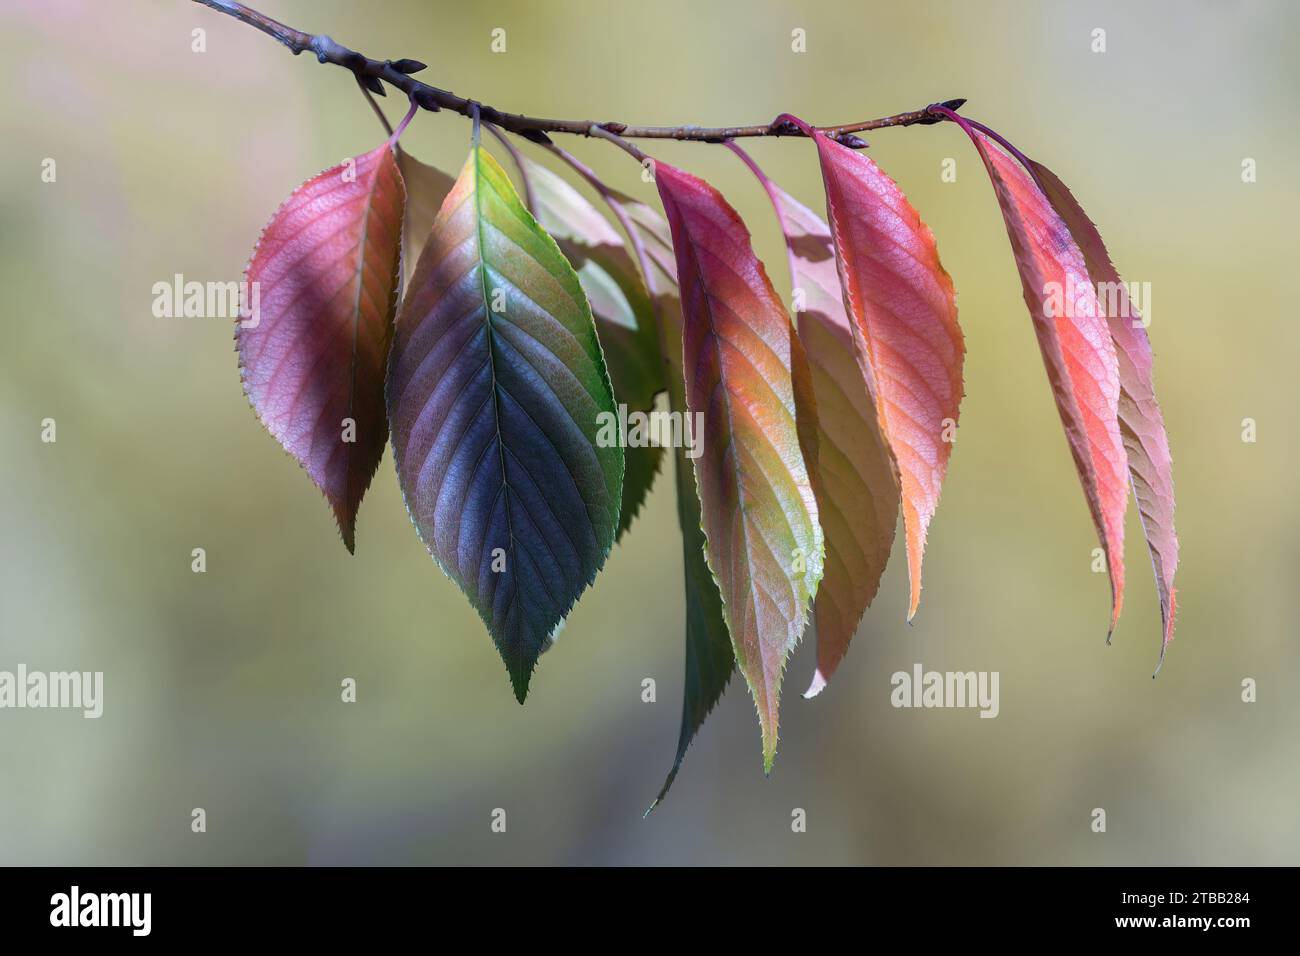 A Branch of Colorful Autumn Leaves Stock Photo